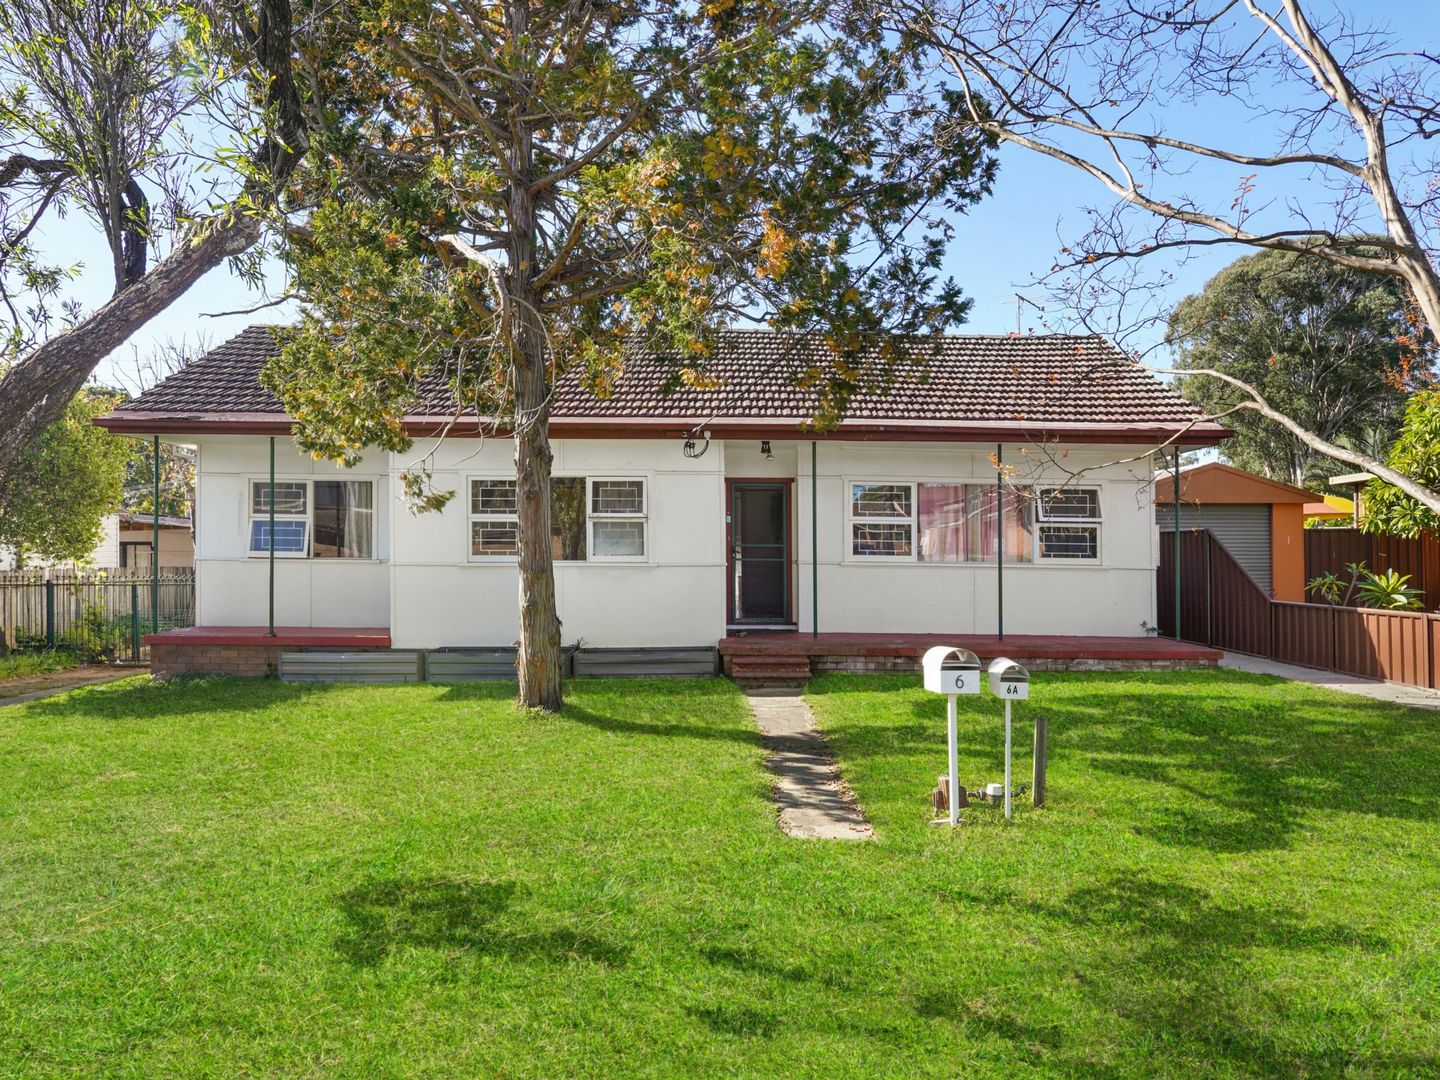 6 and 6A Kings Road, Ingleburn NSW 2565, Image 2